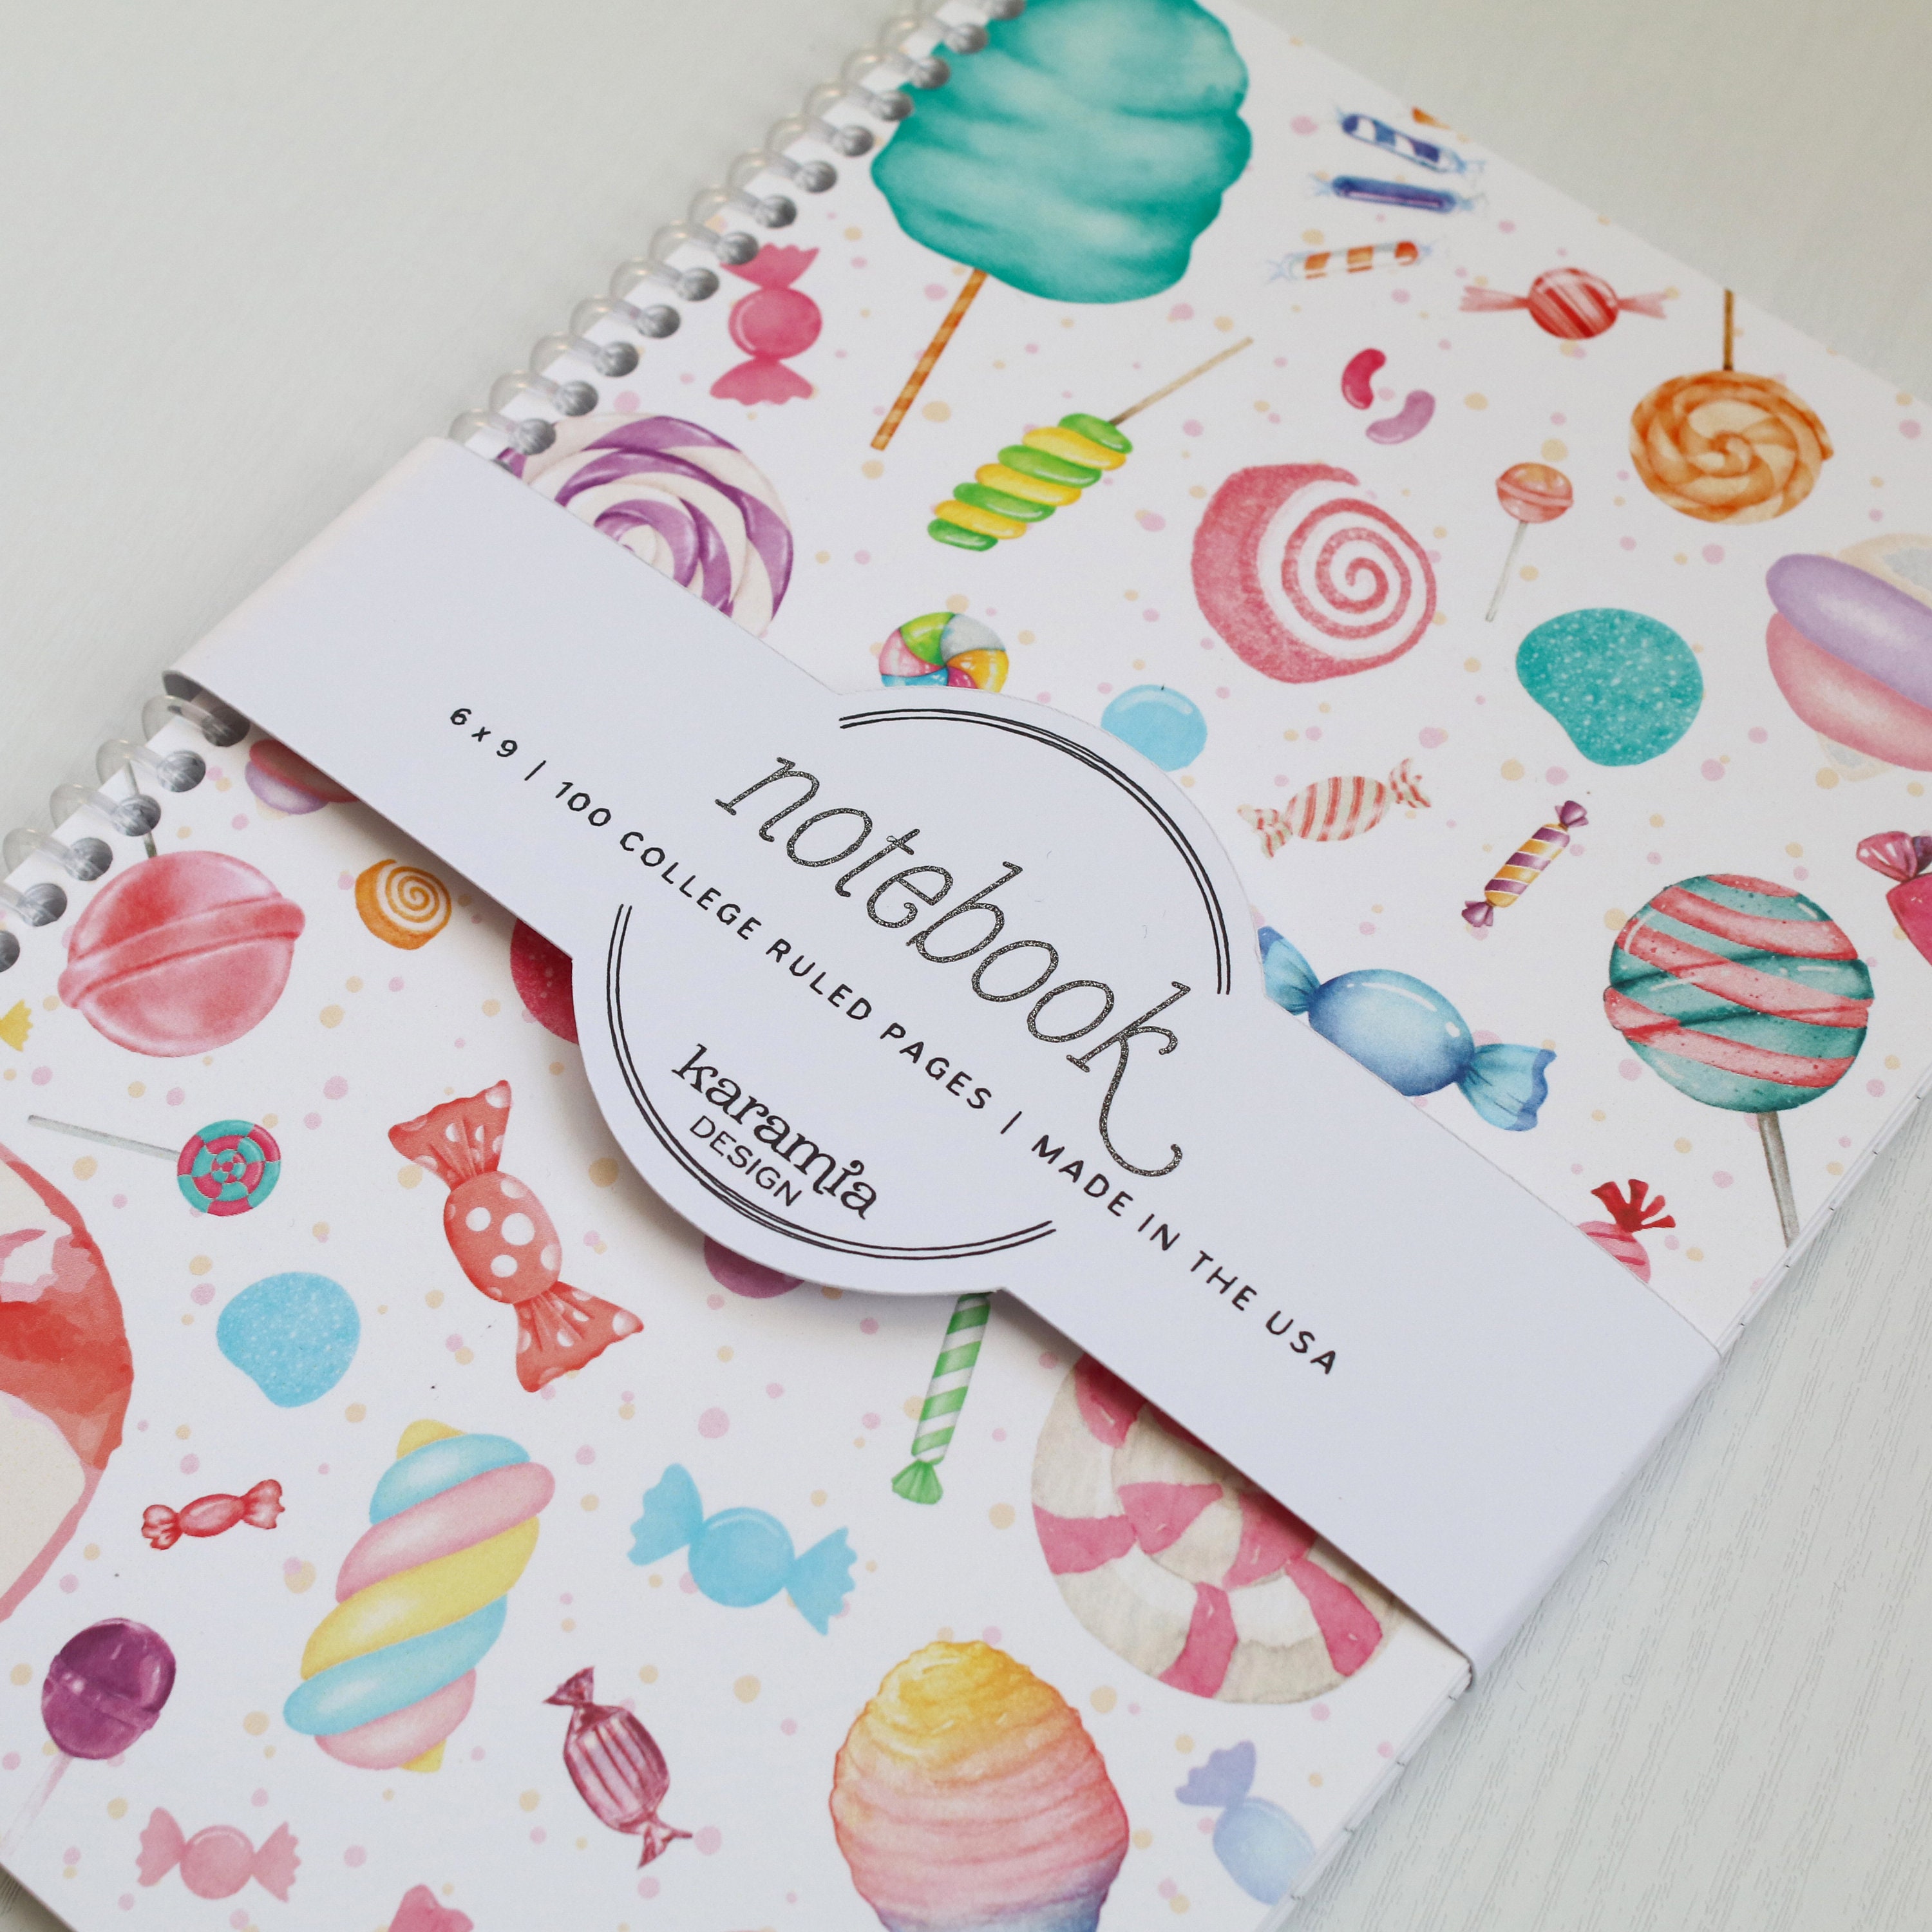 Candy Notebook, Cute Sketchbook, Pretty Journal, Candy Lover, Candy Gifts,  Sweets and Treats, Cotton Candy Art, Softcover Notebook 